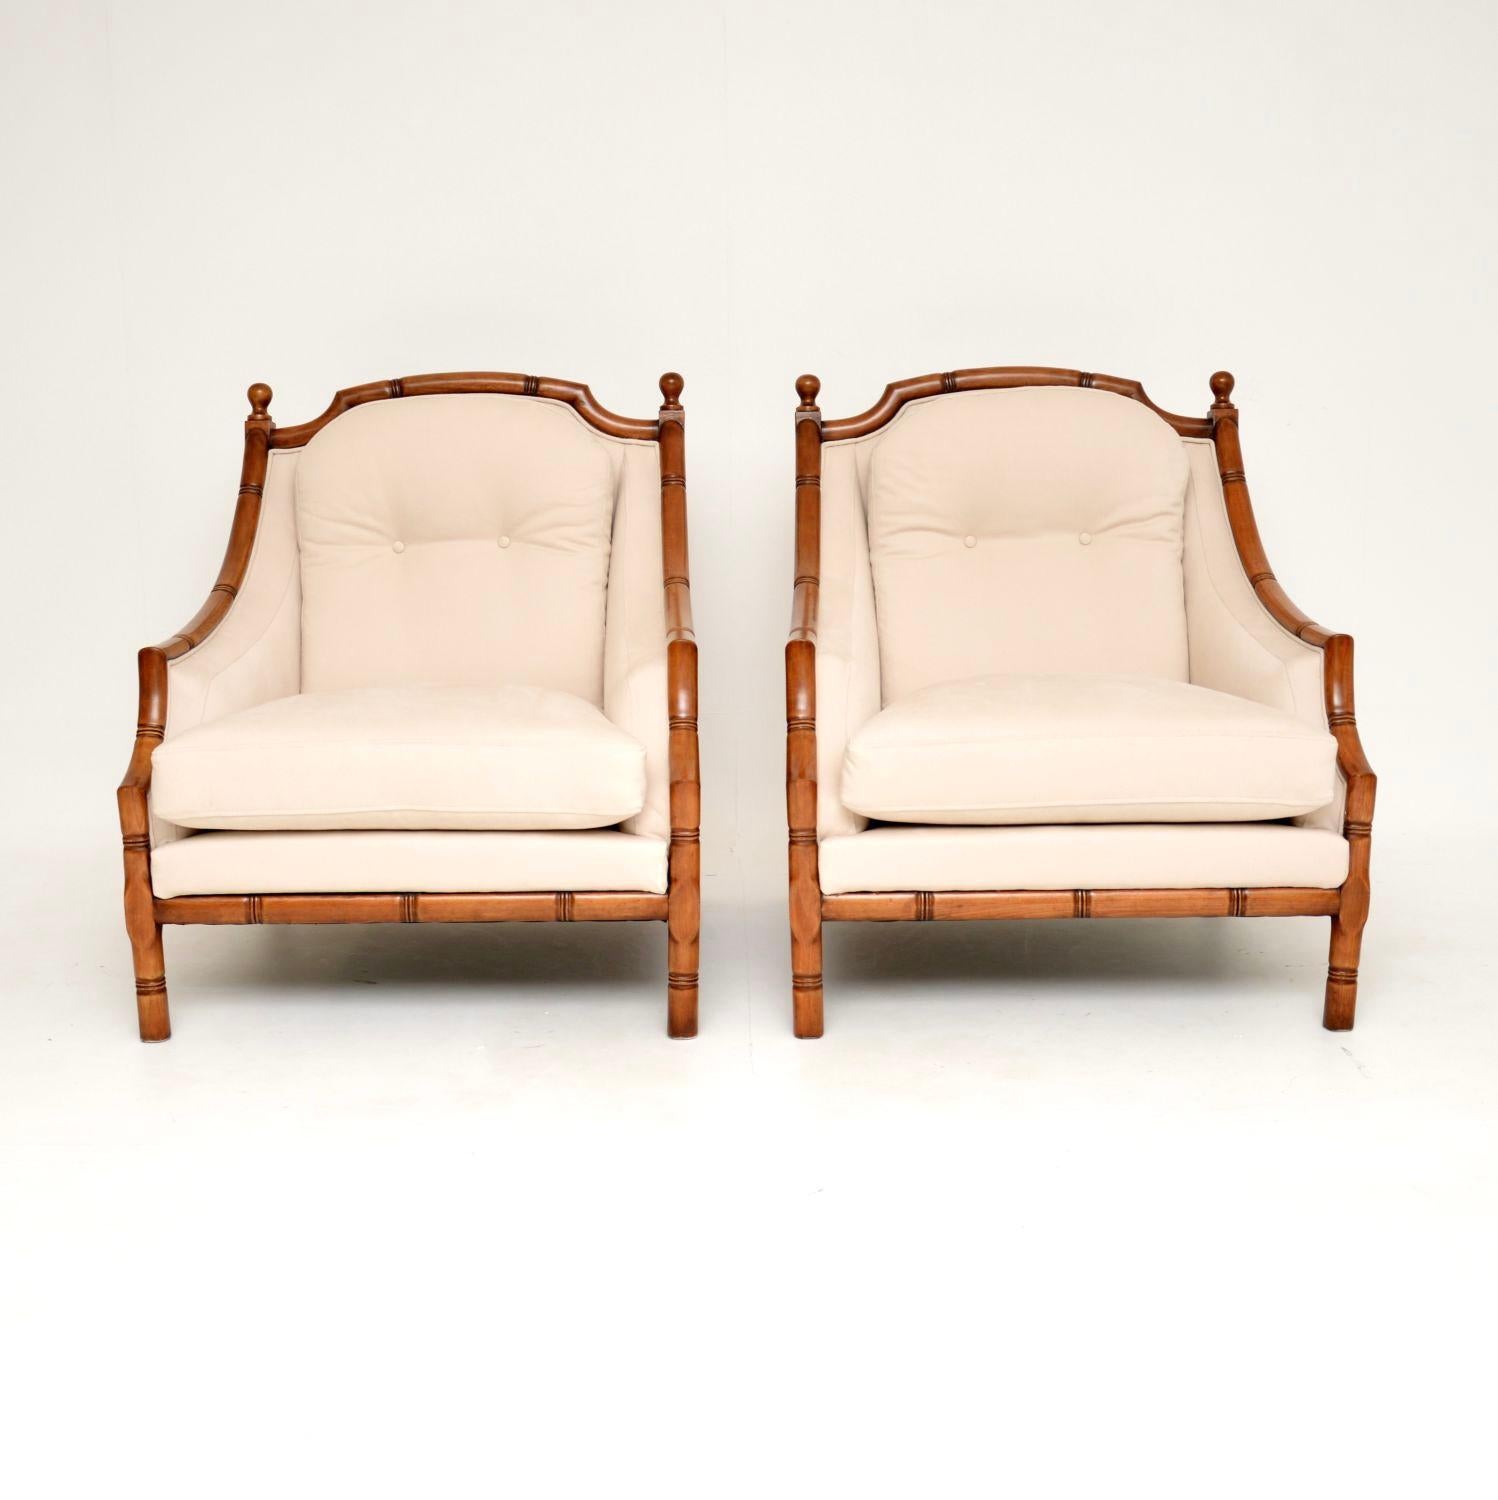 A stunning and unusual pair of Swedish vintage armchairs in the antique colonial style. They were recently imported from Sweden, and they date from around the 1950’s.

The quality is amazing, they are also extremely comfortable & have very generous